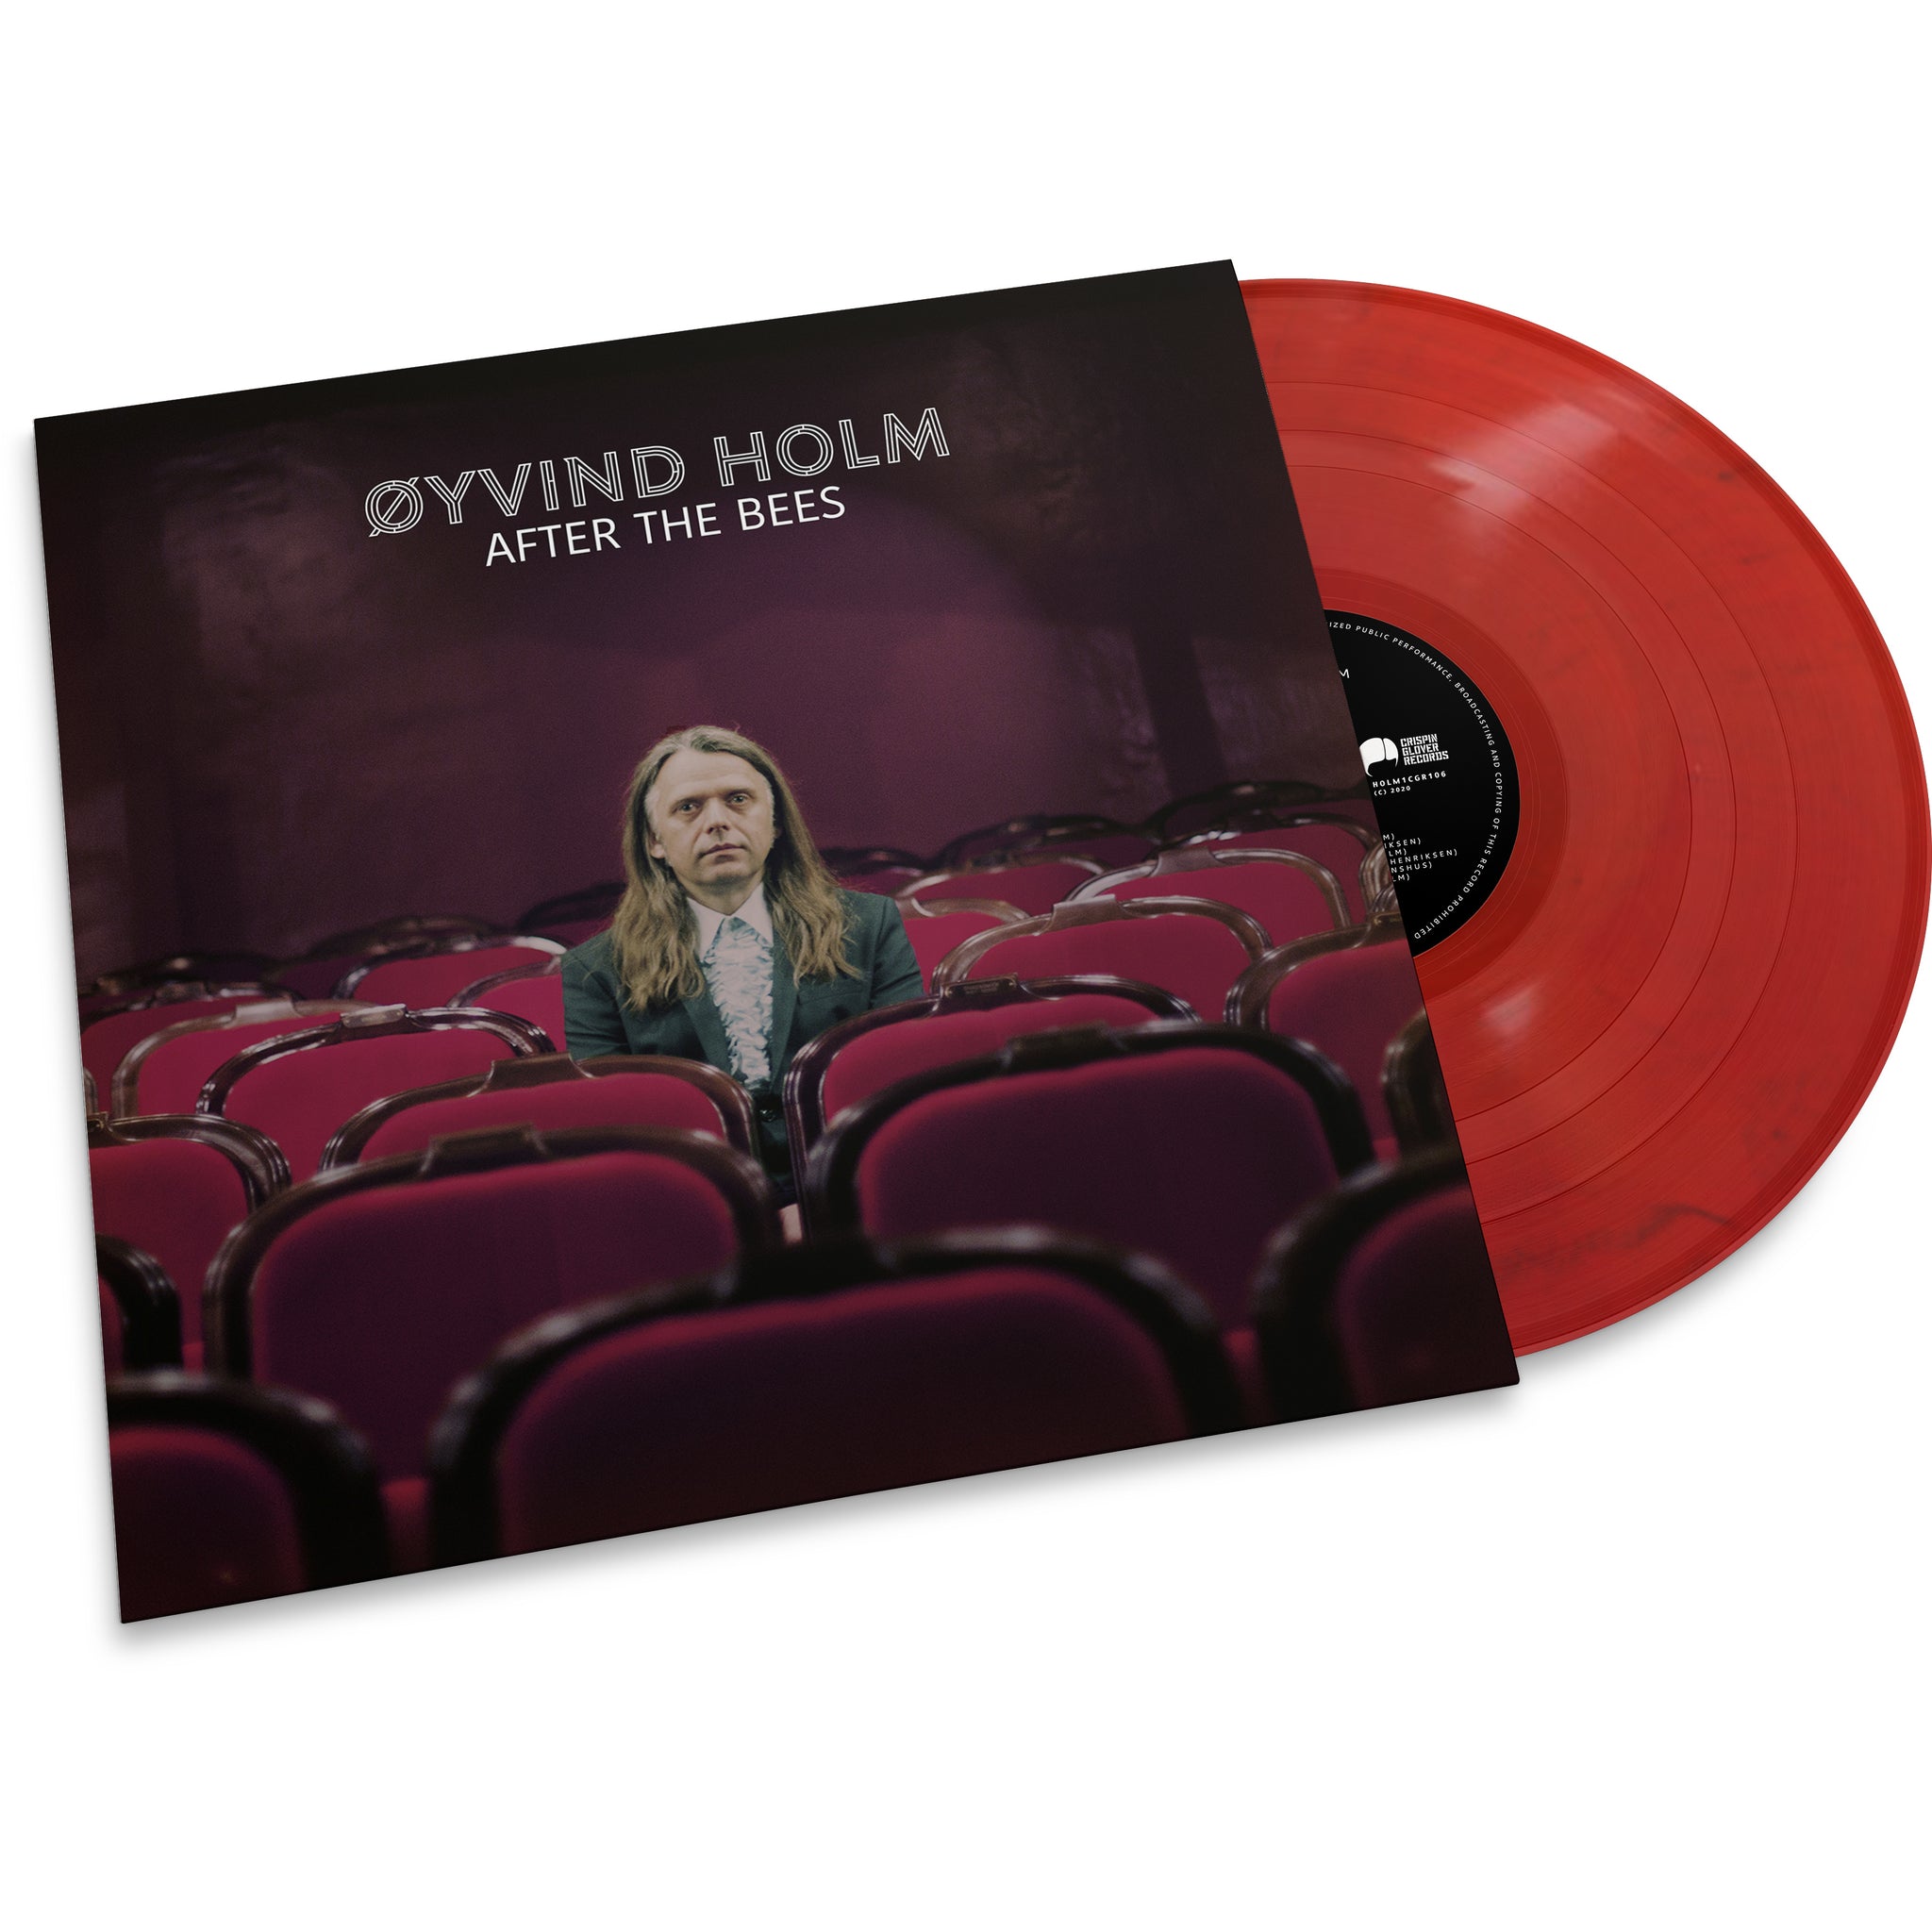 Øyvind Holm - After The Bees (LTD Transparent red mixed with black + bonus 7") 300 copies only.